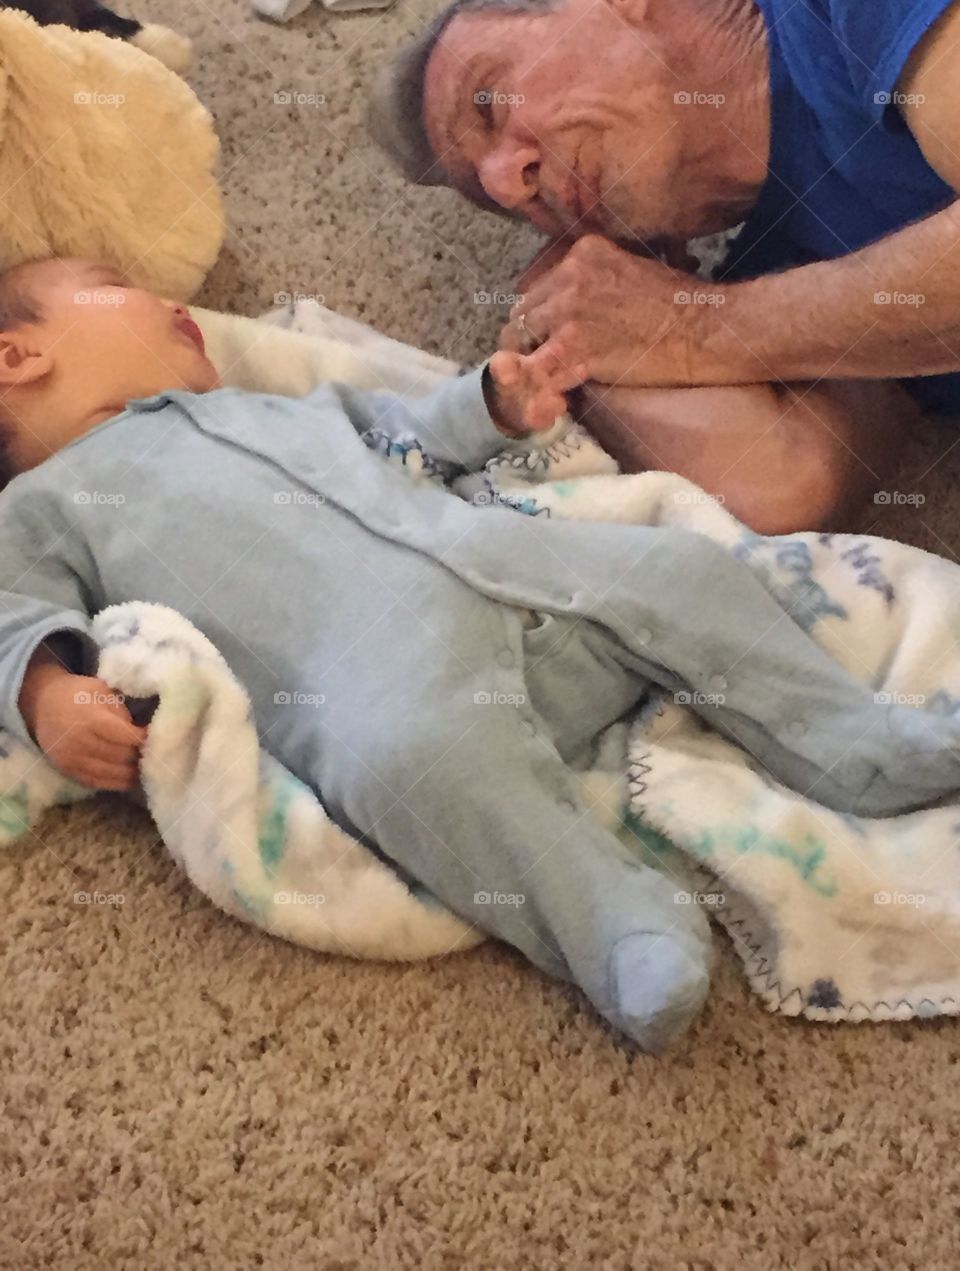 Grandpa and baby nor grandson lying on the floor playing.